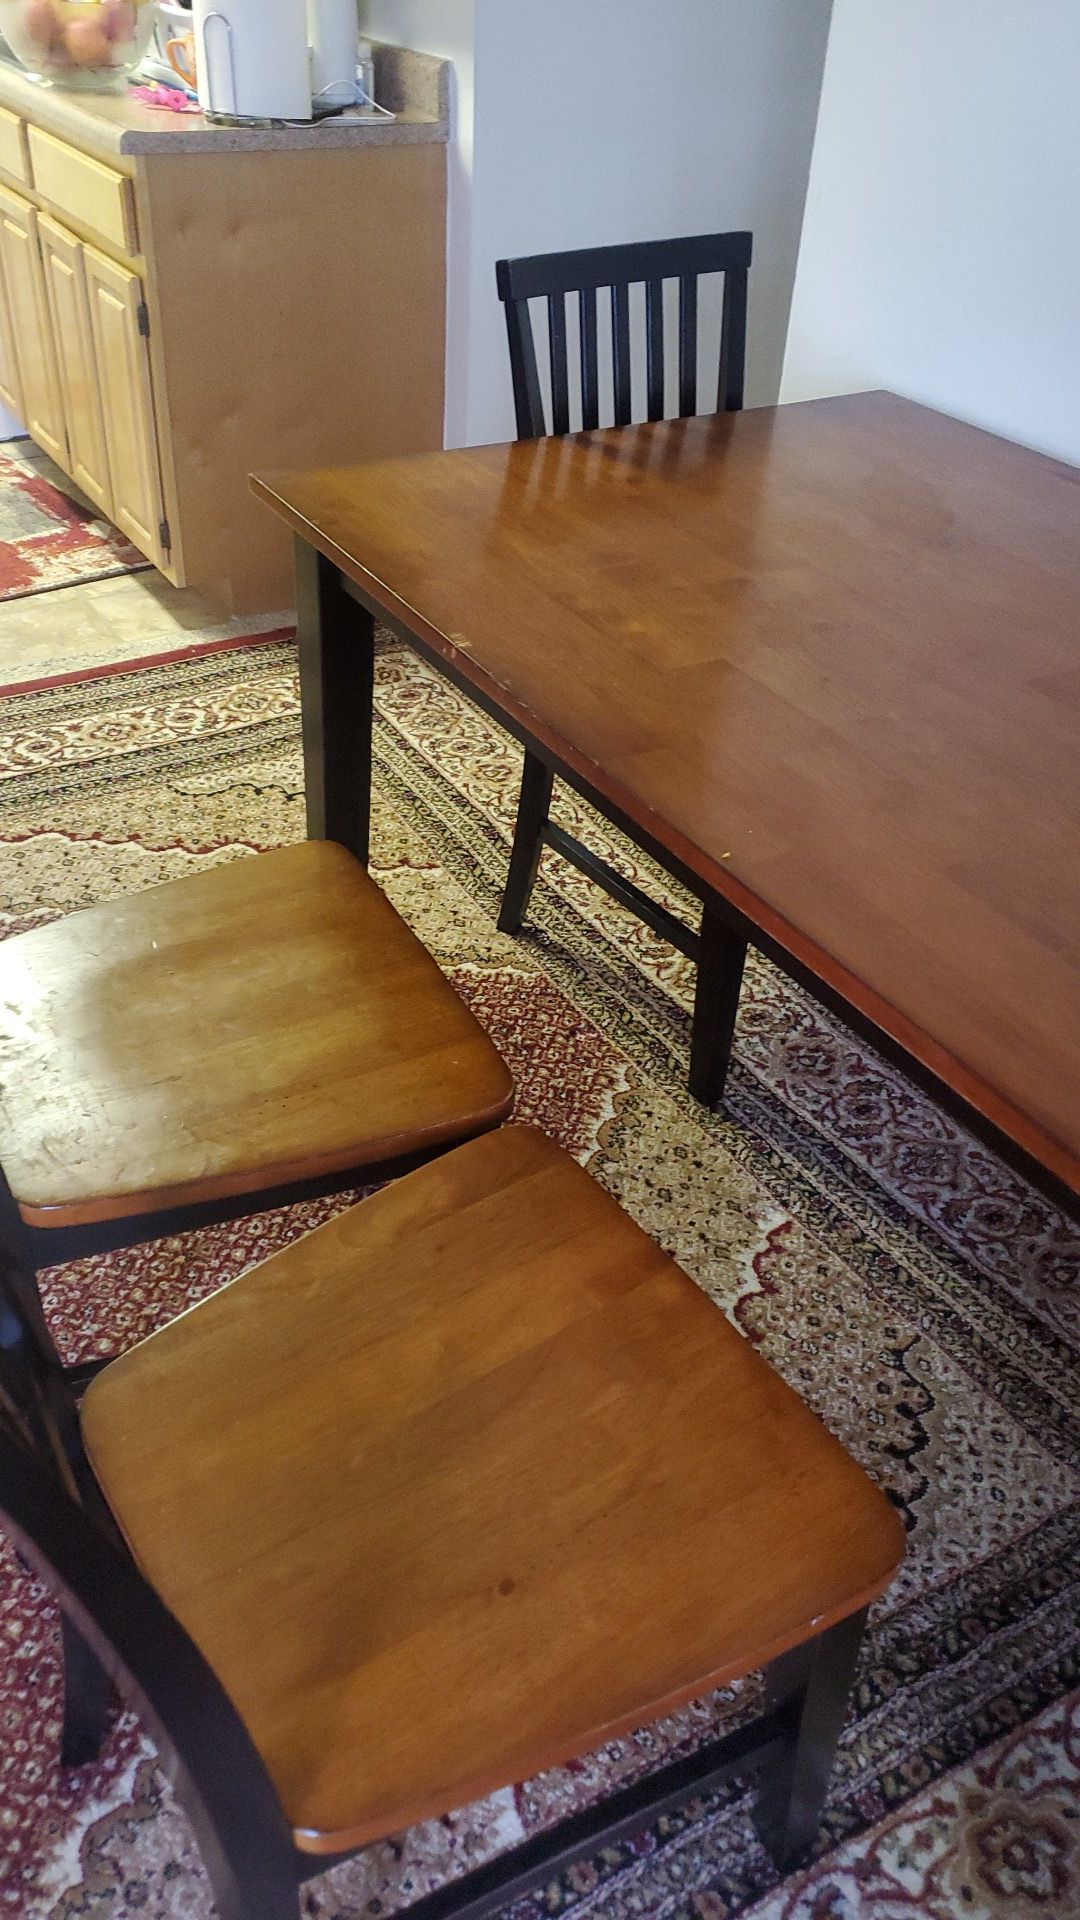 Dinning room table with 4 chairs